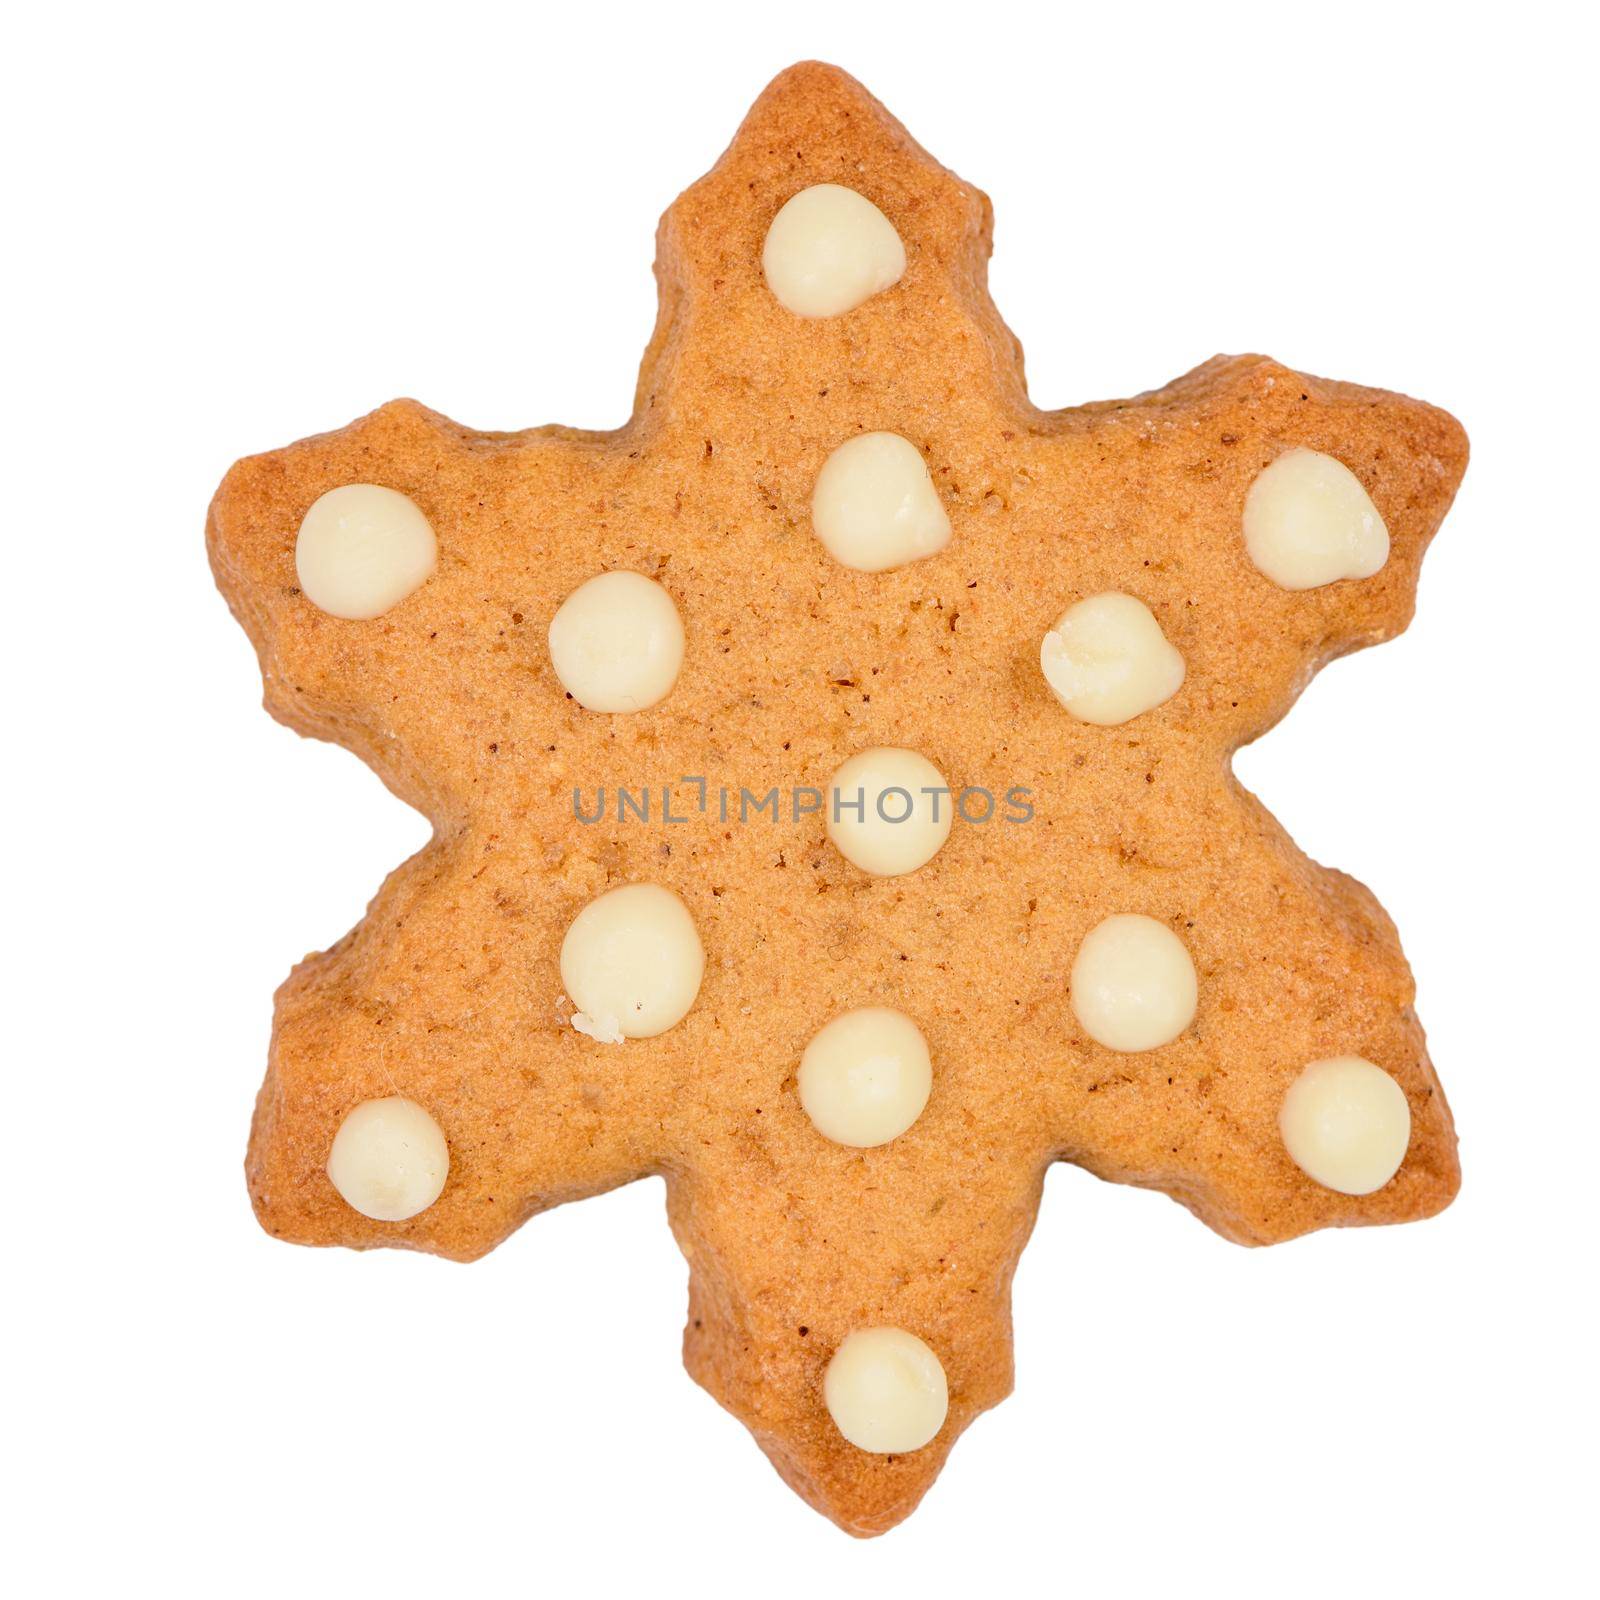 Tasty homemade Christmas cookie on white background.